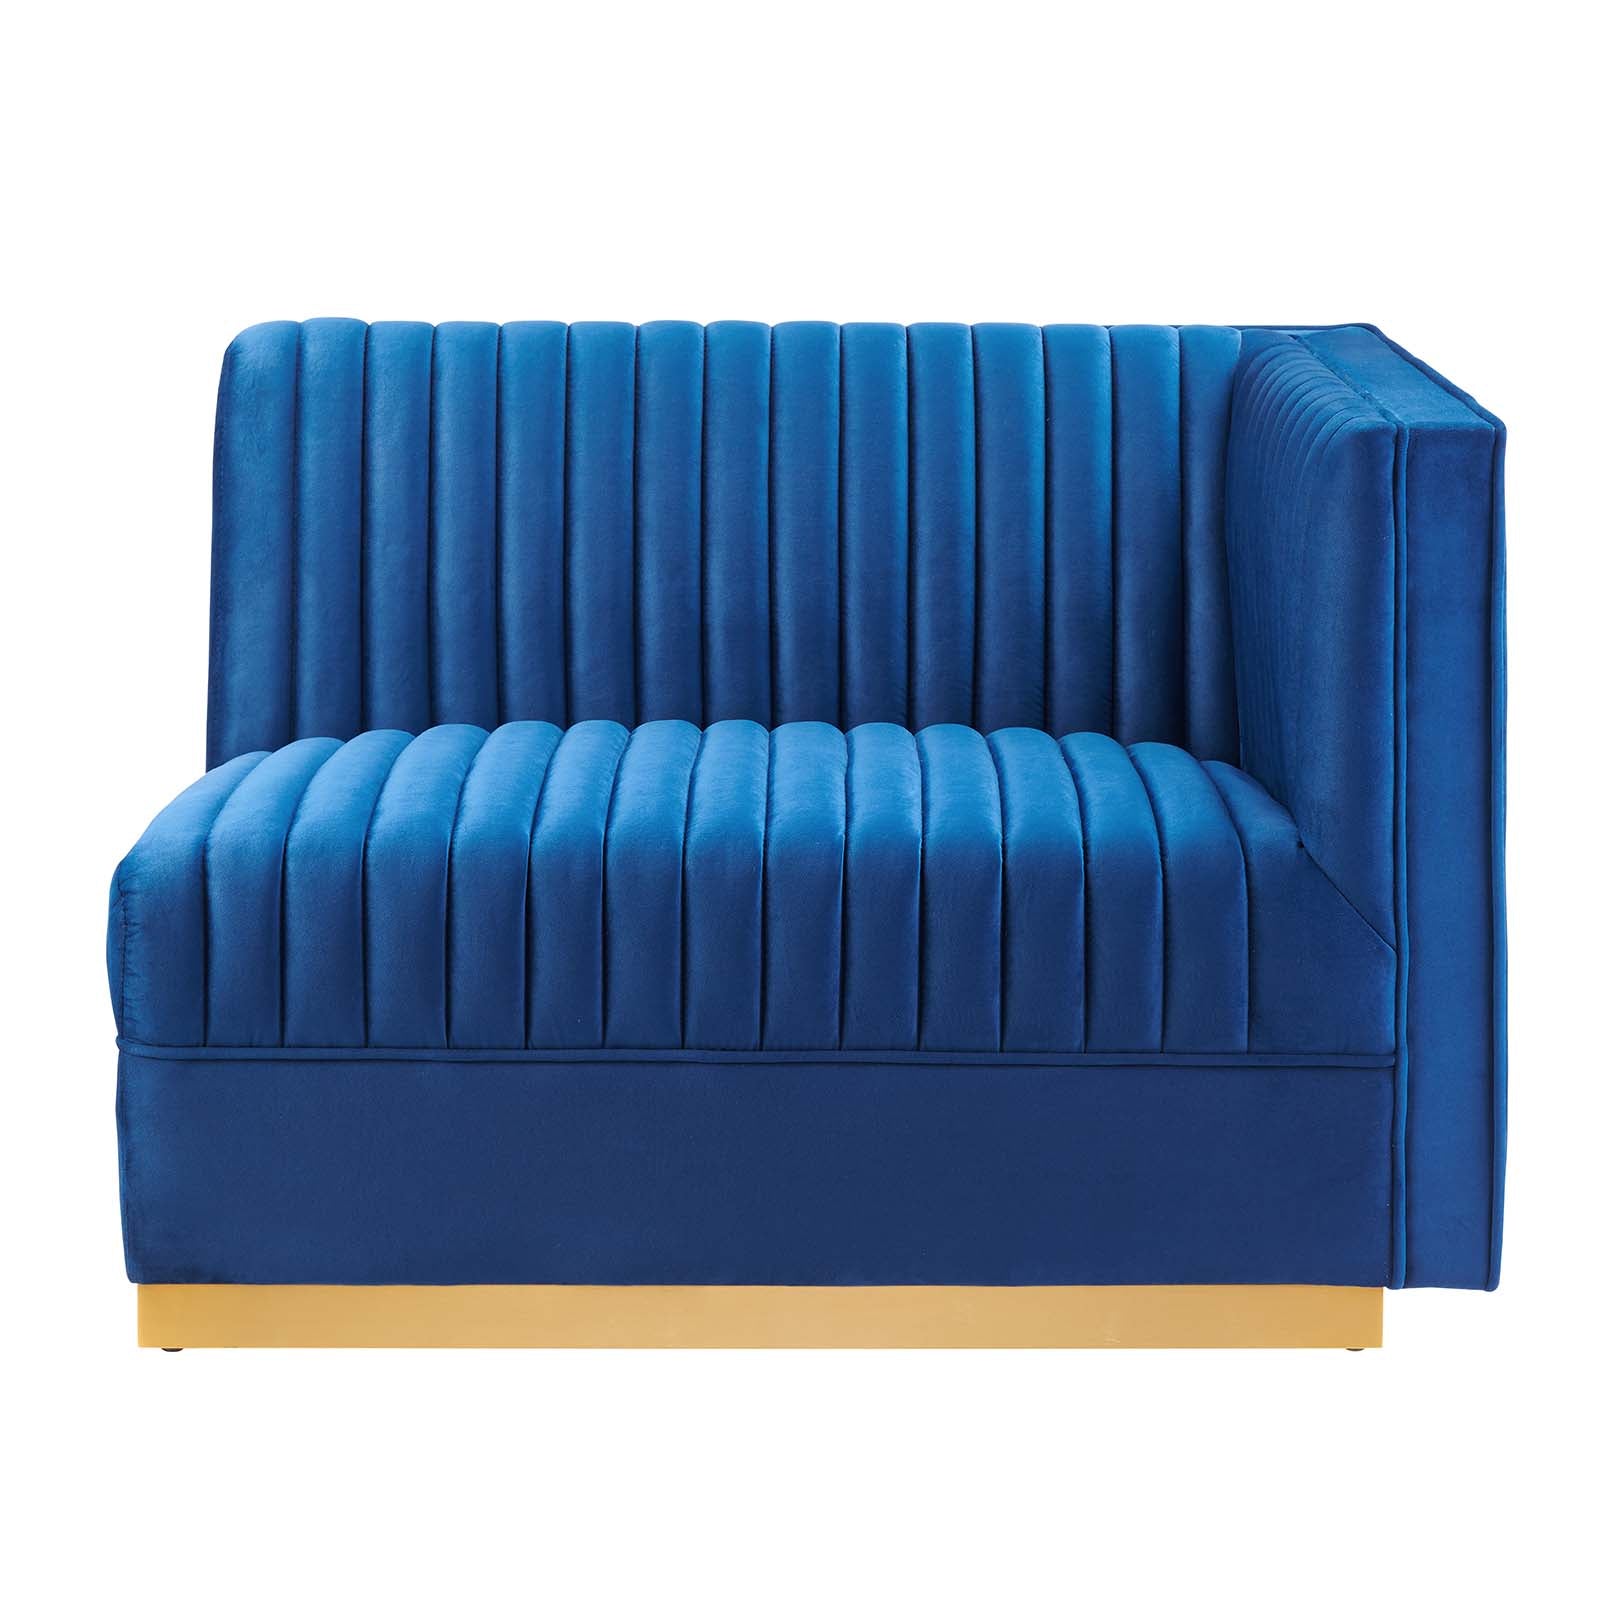 Modway Accent Chairs - Sanguine Channel Tufted Performance Velvet Modular Sectional Sofa Right-Arm Chair Navy Blue